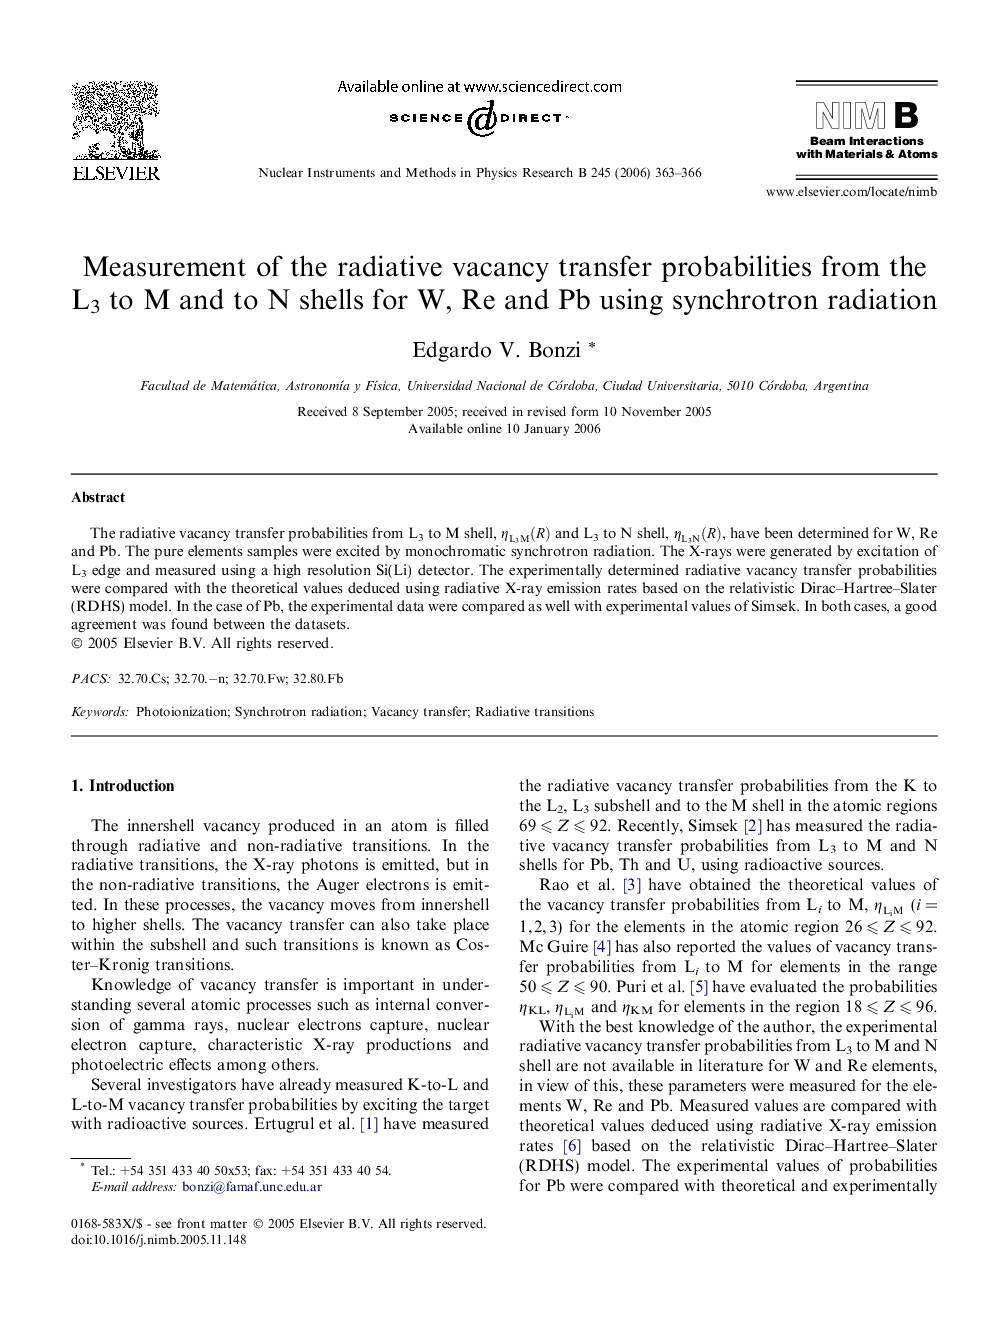 Measurement of the radiative vacancy transfer probabilities from the L3 to M and to N shells for W, Re and Pb using synchrotron radiation